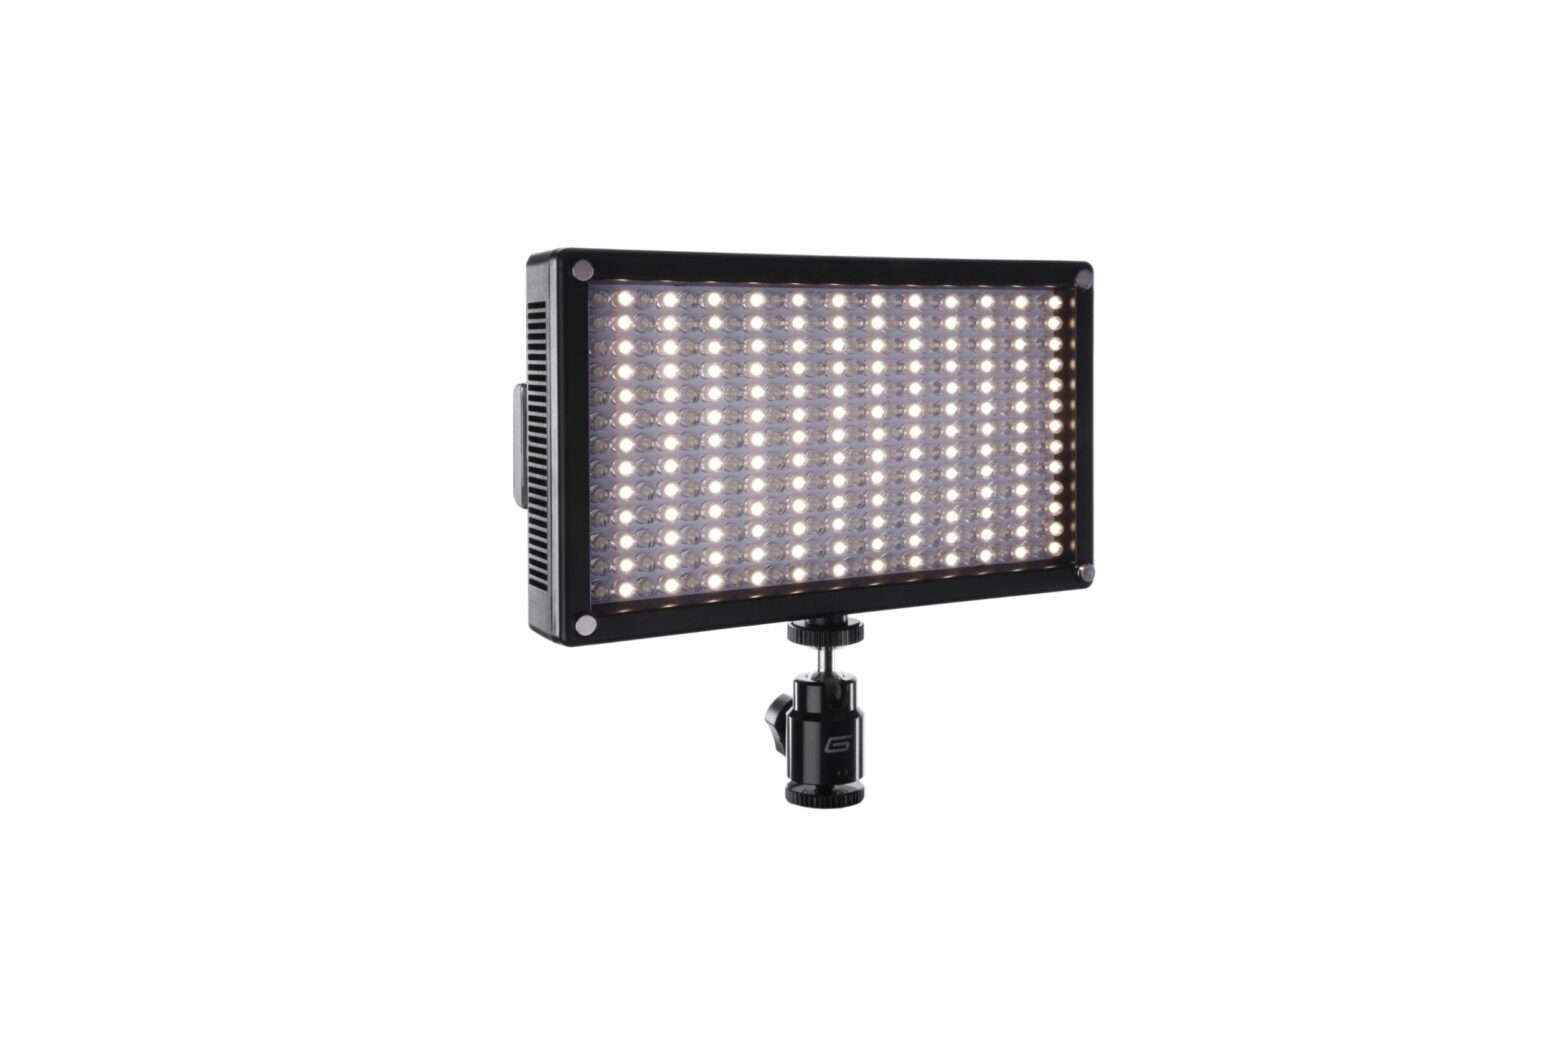 Bhphoto Video Genaray LED 7100T 312 LED Variable Color On Camera Light User Manual - Featured image